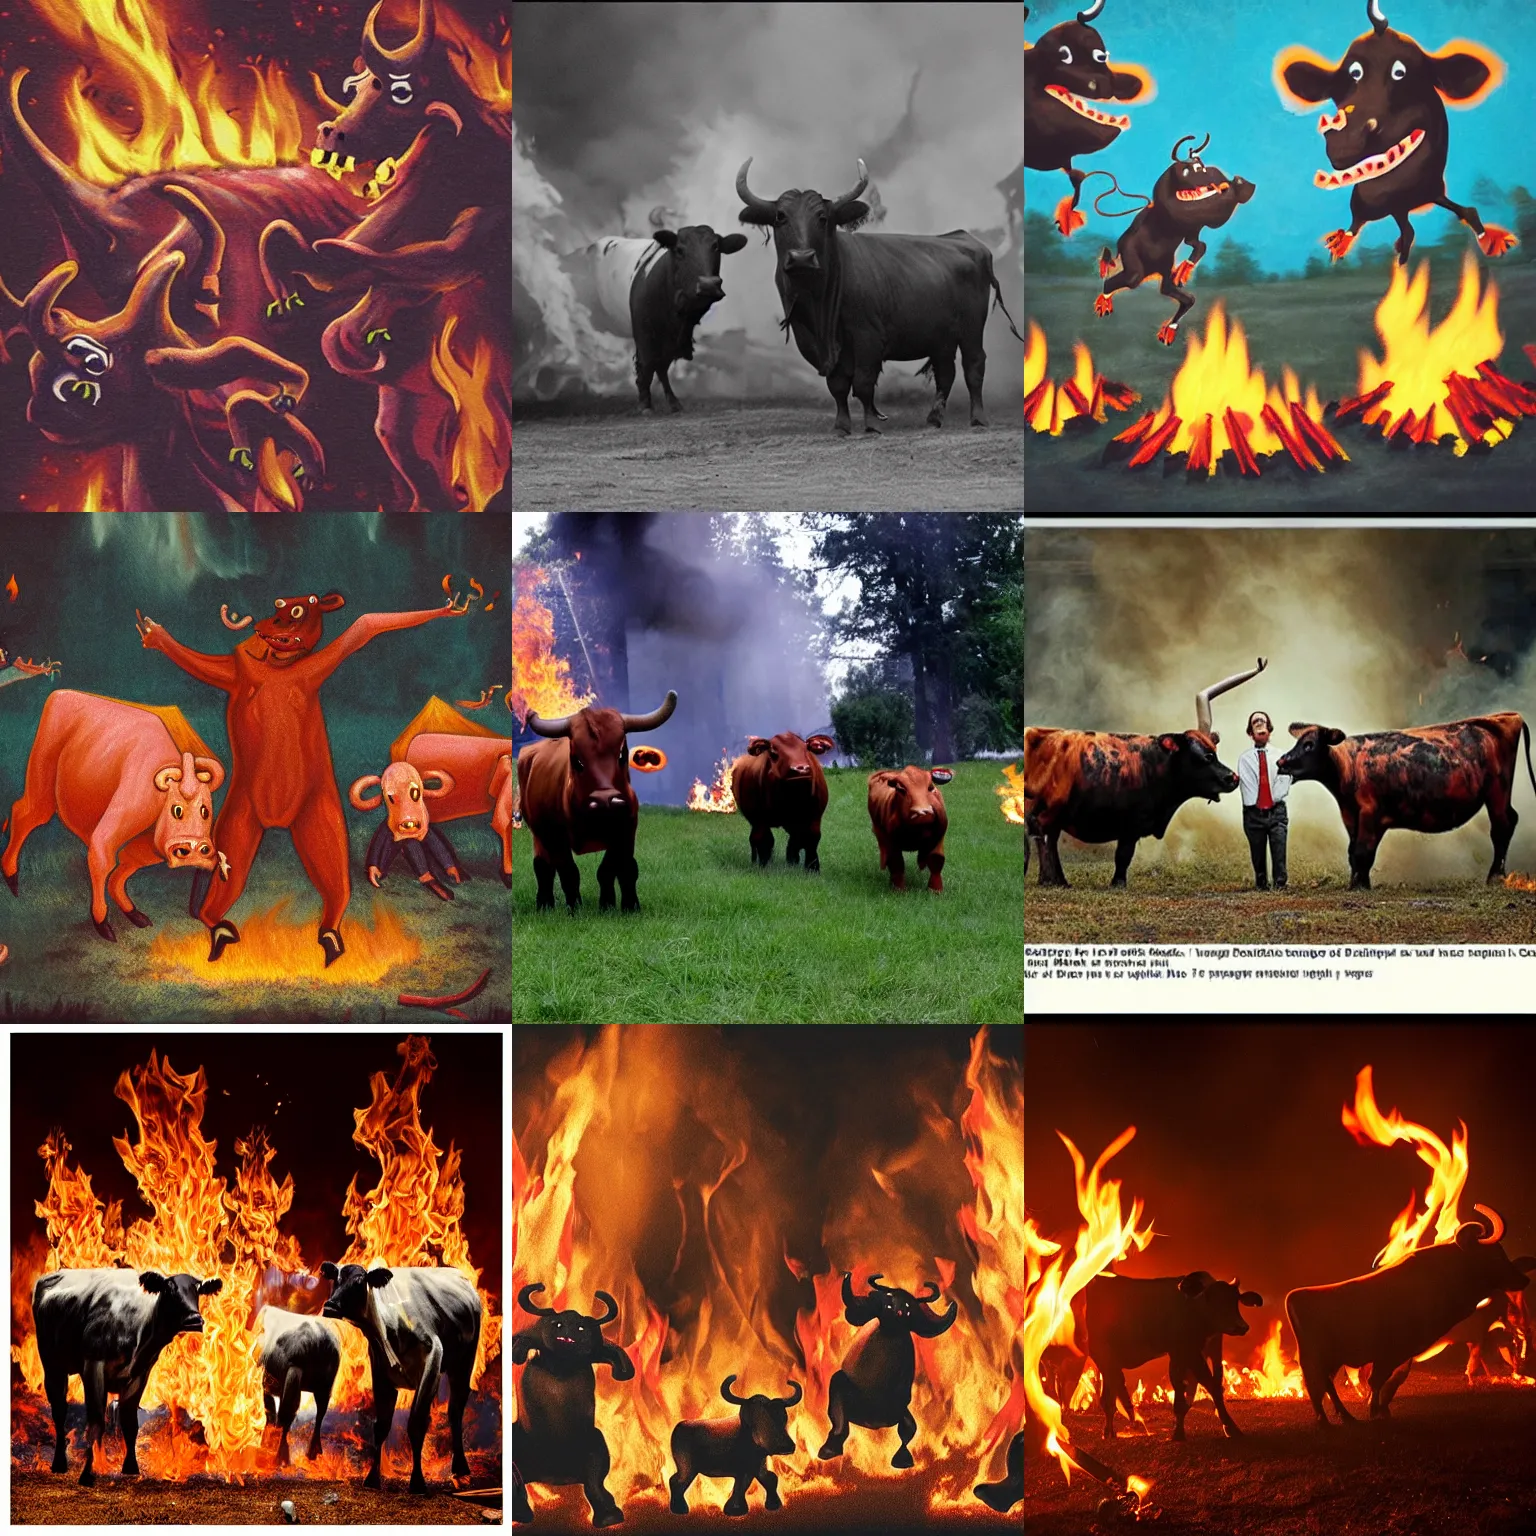 Prompt: photo of dancing demonic anthropomorphic cows around fire, fire, hell